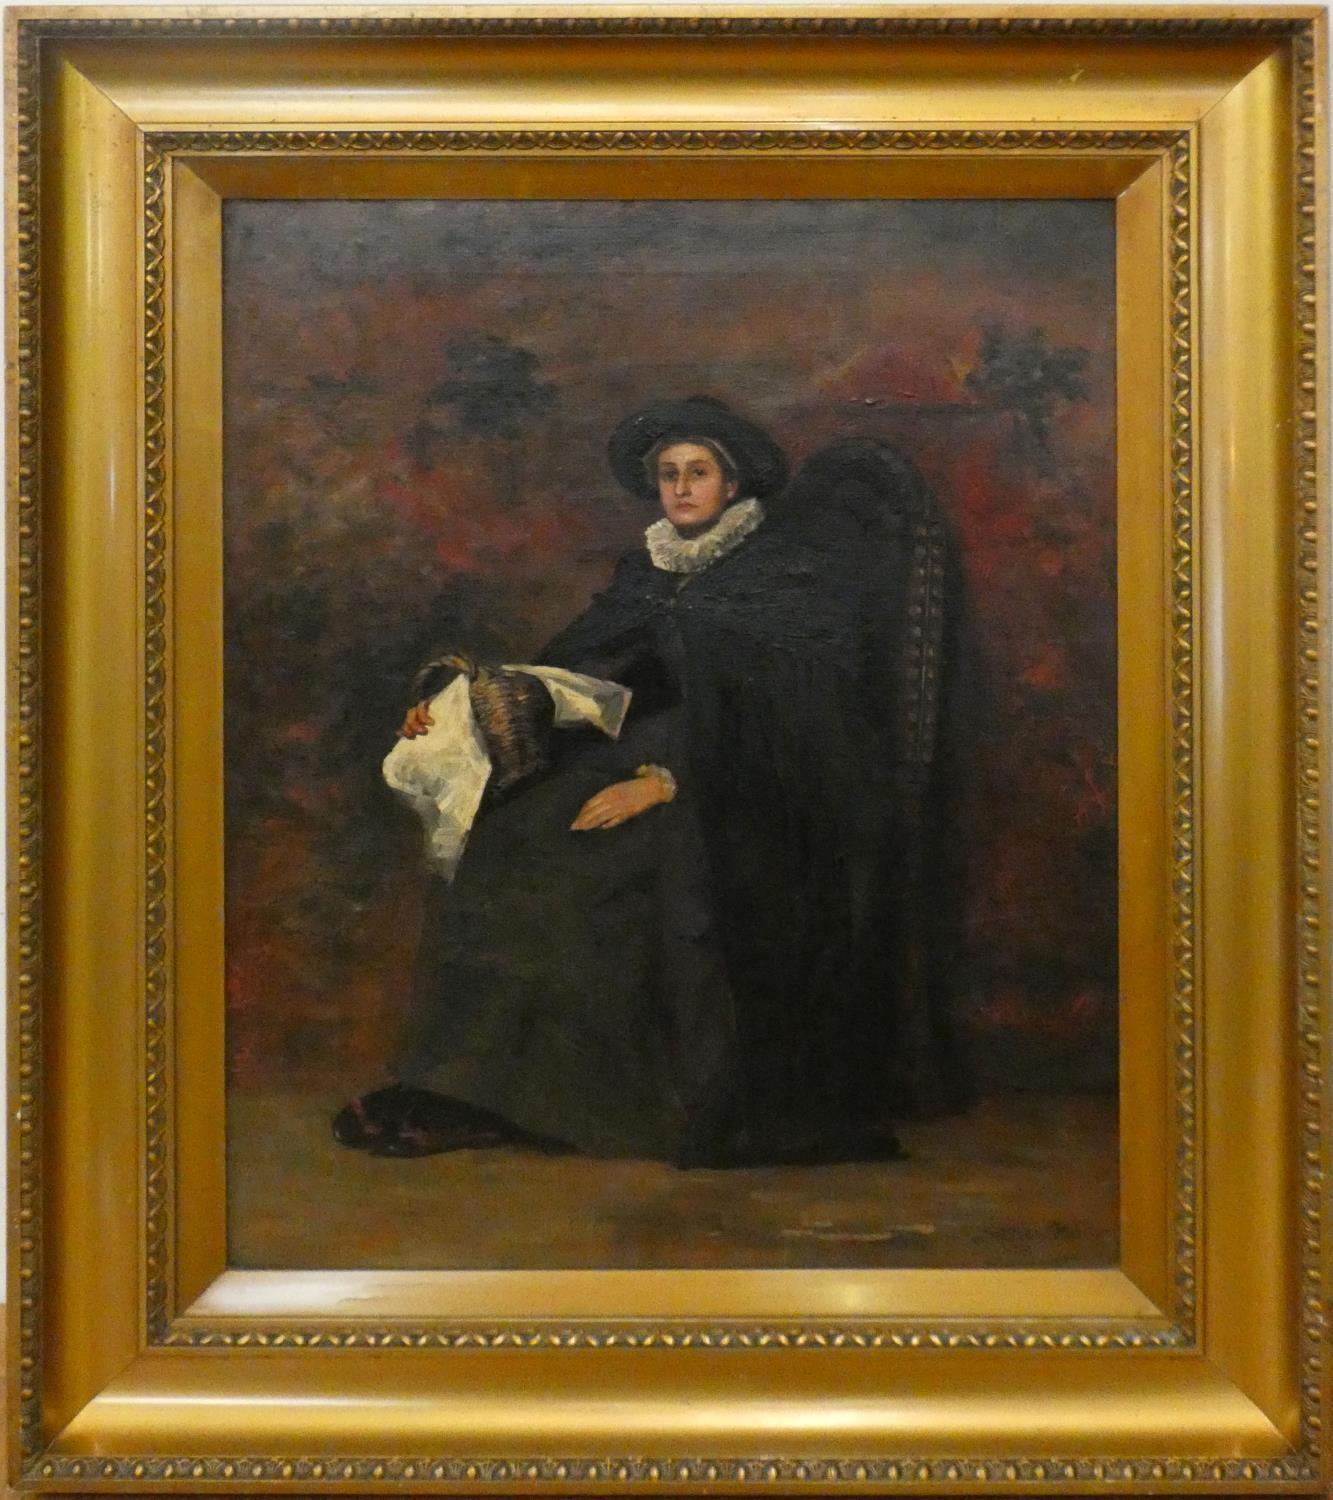 19th century Continental school, lady with white ruff, signed indistinctly, oil on canvas, 50 x 40 - Image 2 of 4